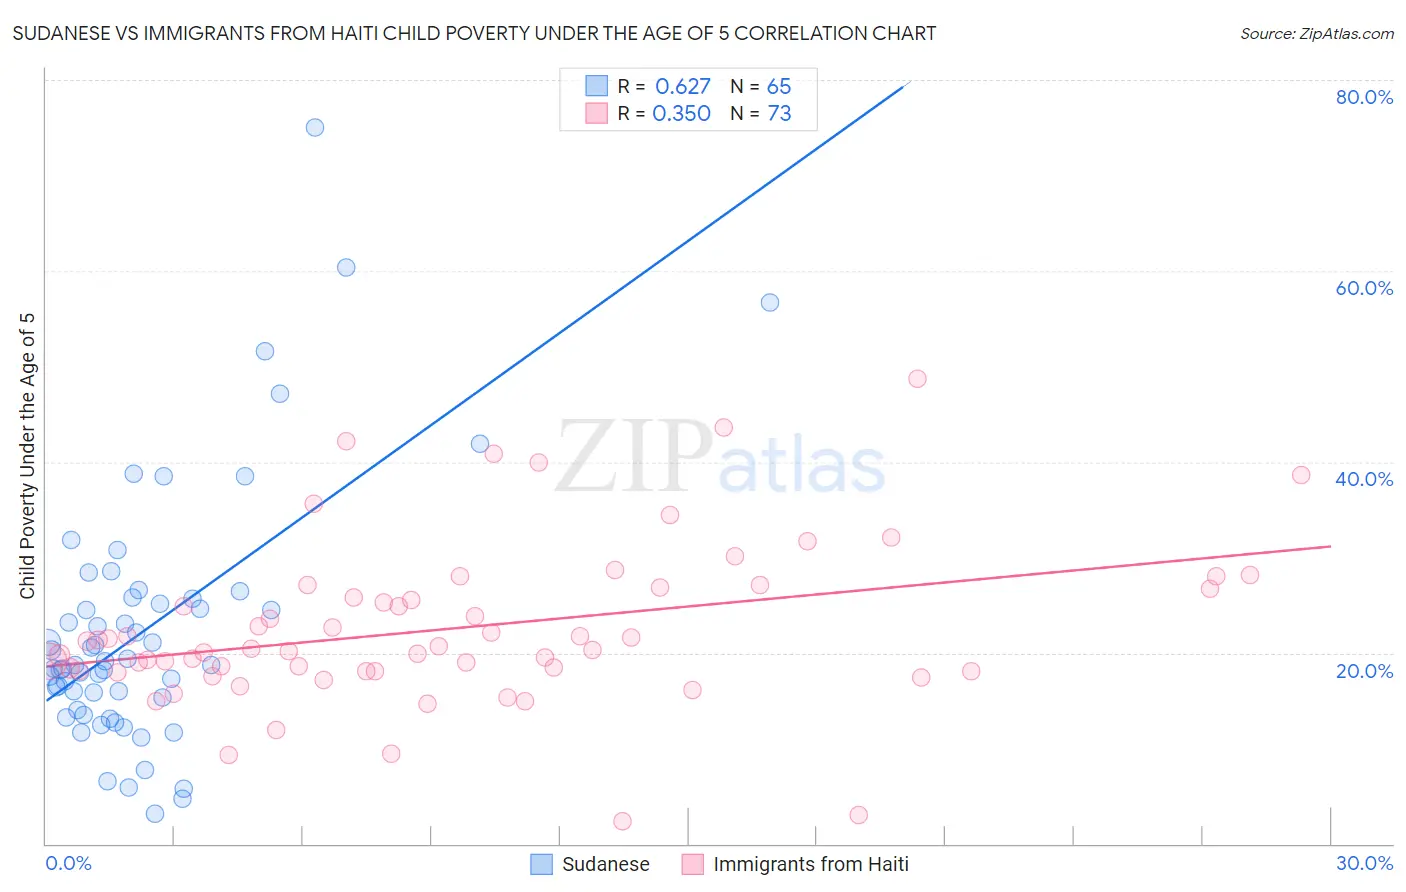 Sudanese vs Immigrants from Haiti Child Poverty Under the Age of 5